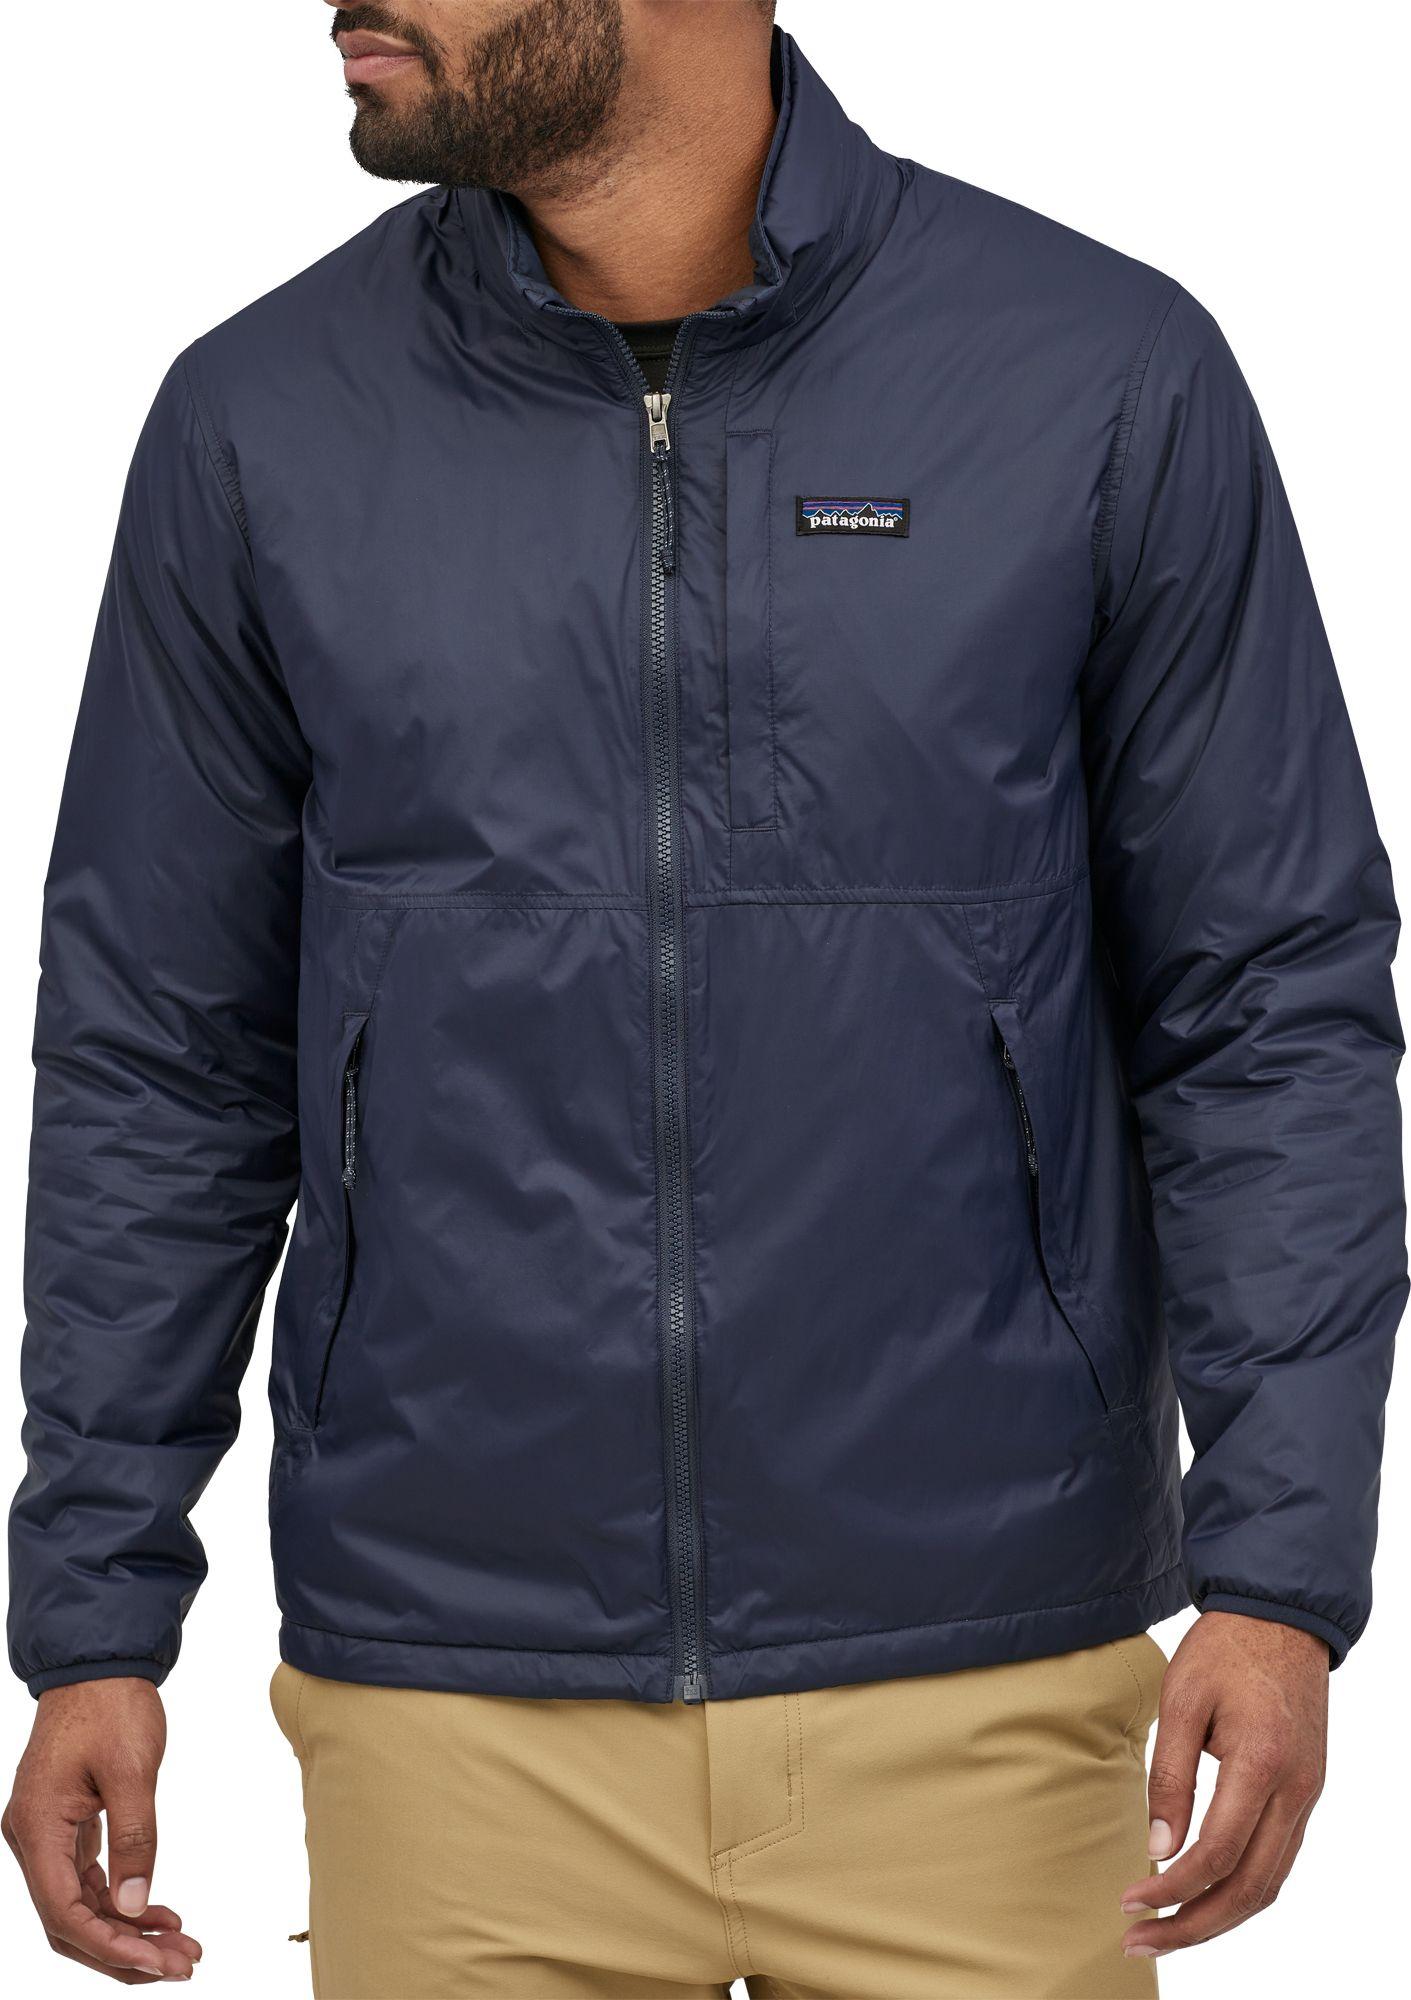 Patagonia Mojave Trails Jacket in Blue for Men - Lyst